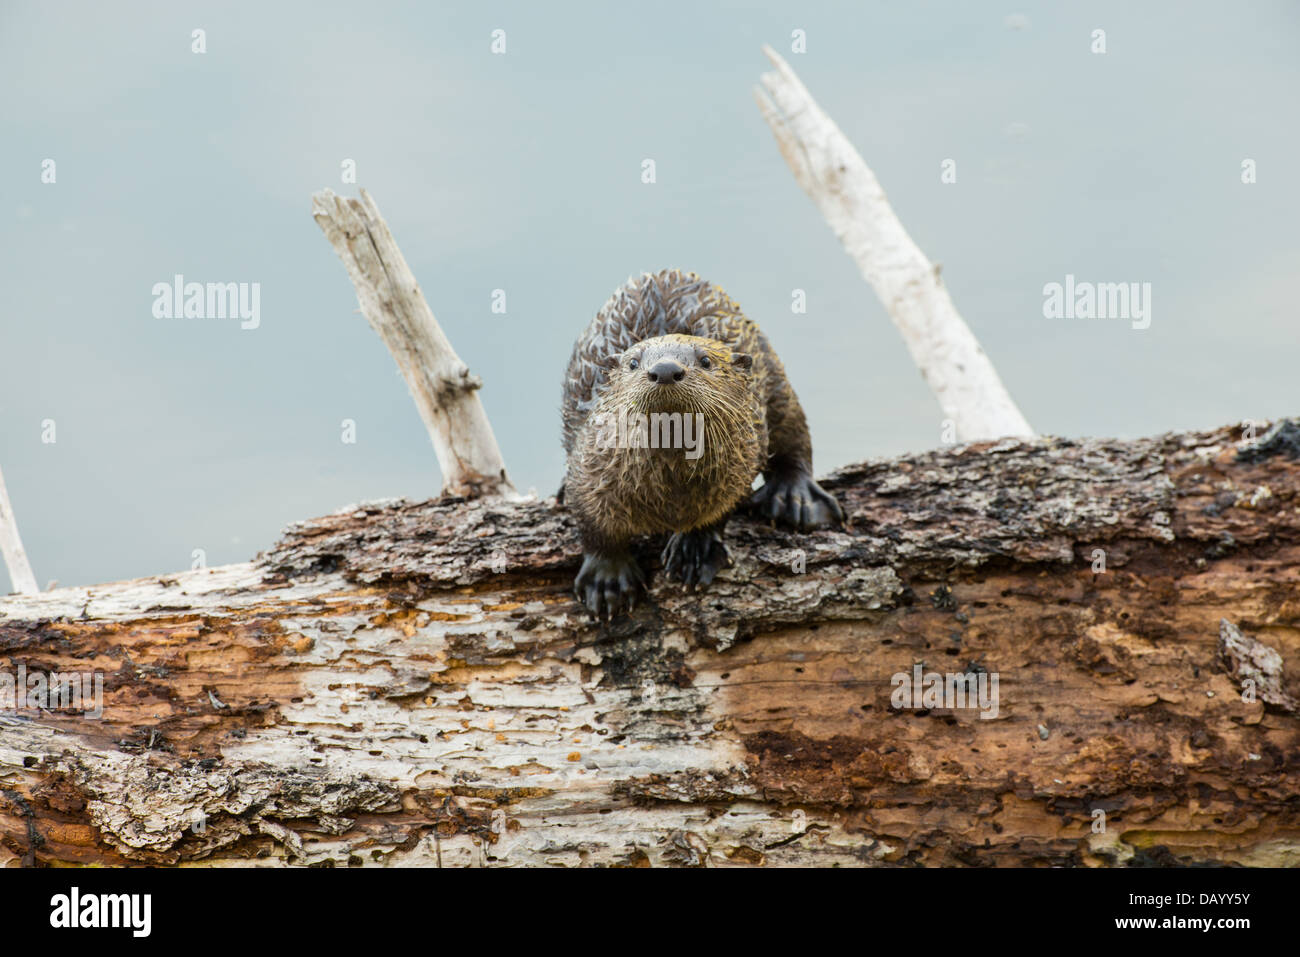 Stock photo of a North American river otter pup on a log. Stock Photo